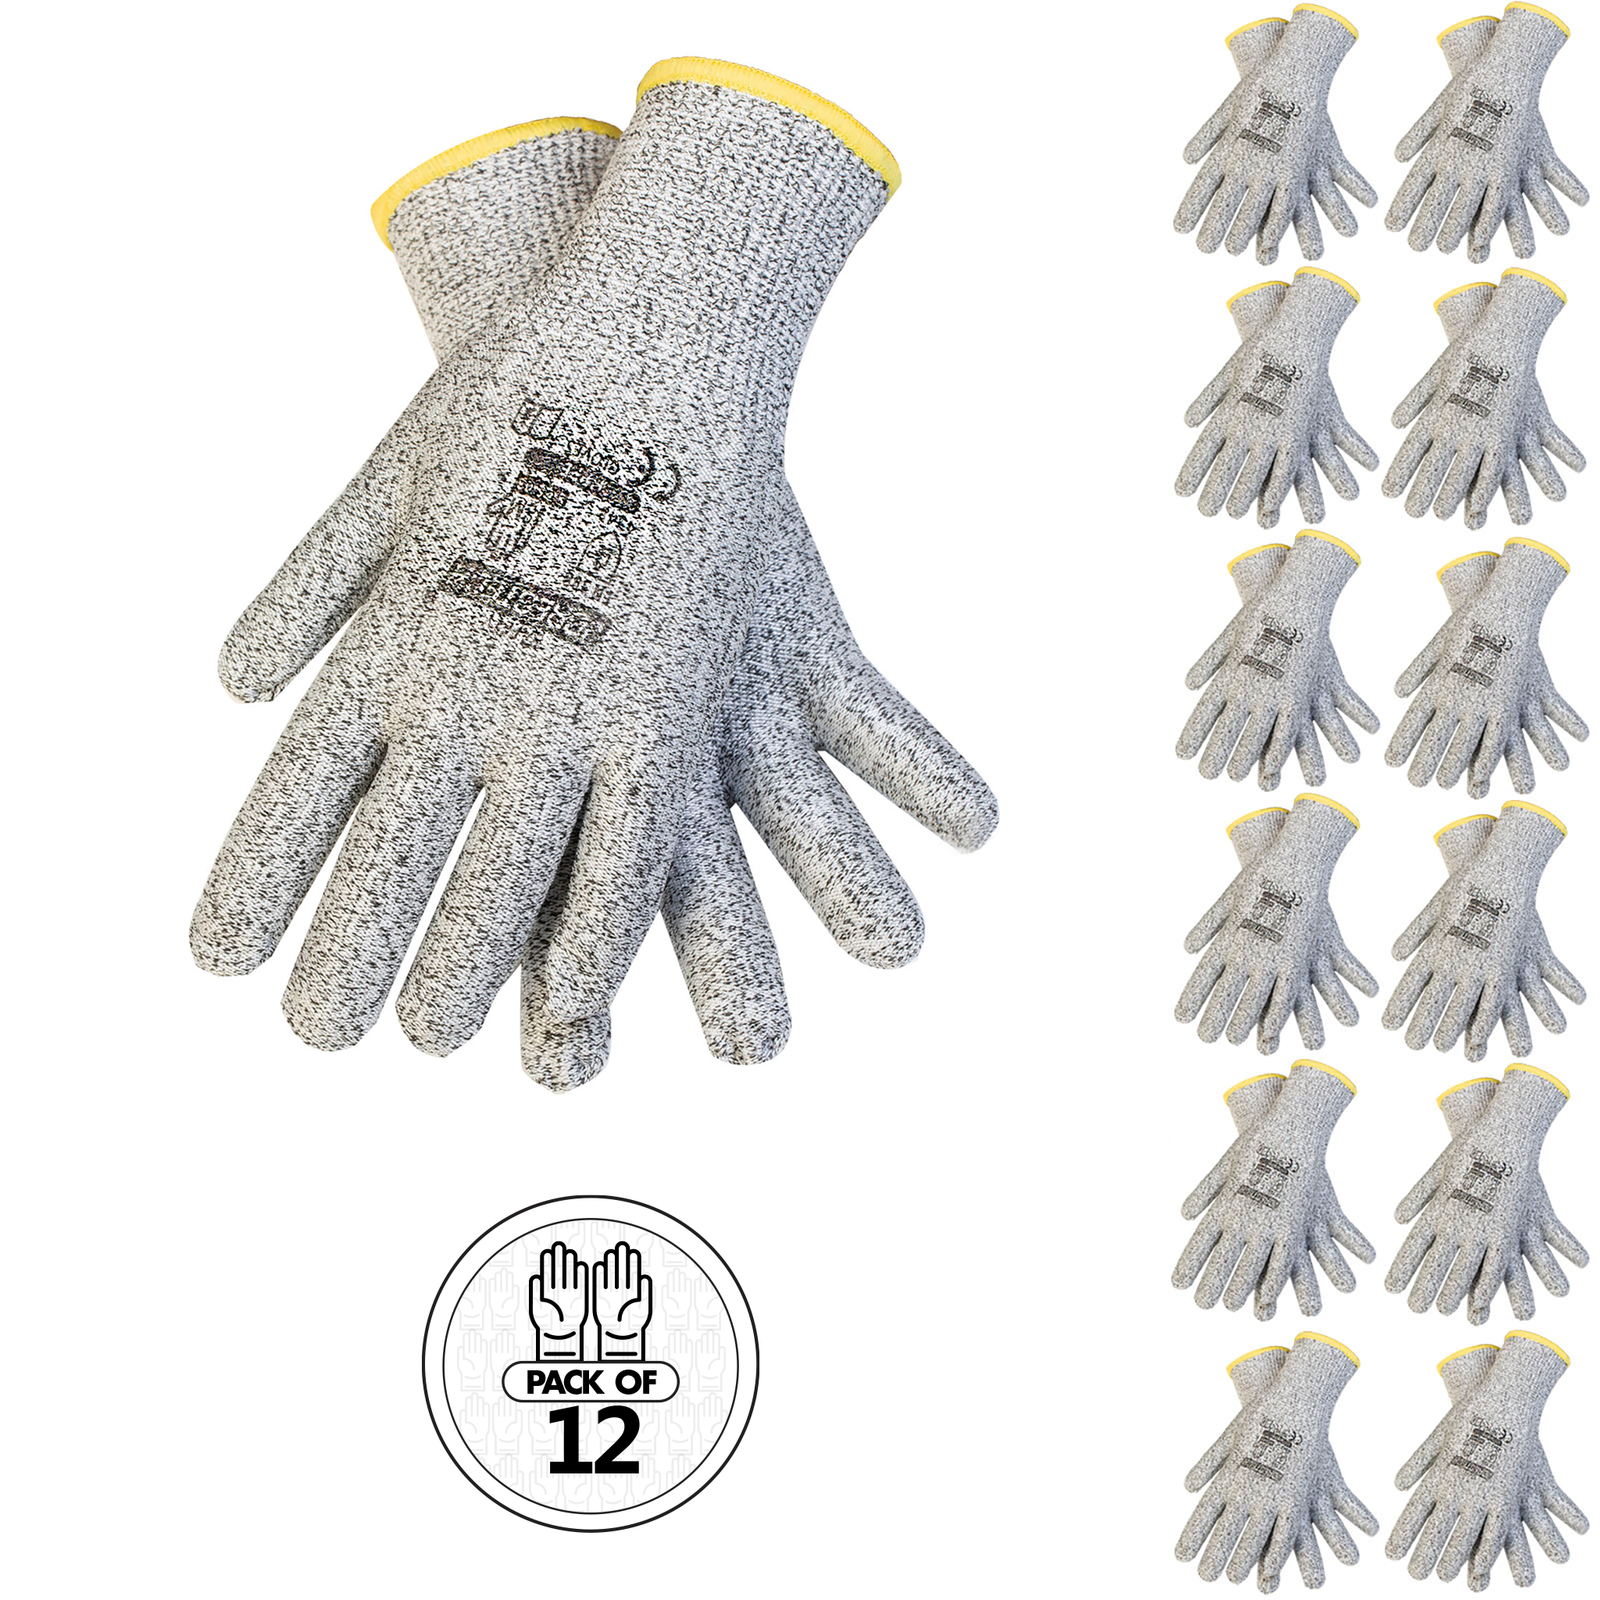 12 pairs of the JORESTECH Cut Resistant multi purpose safety gloves